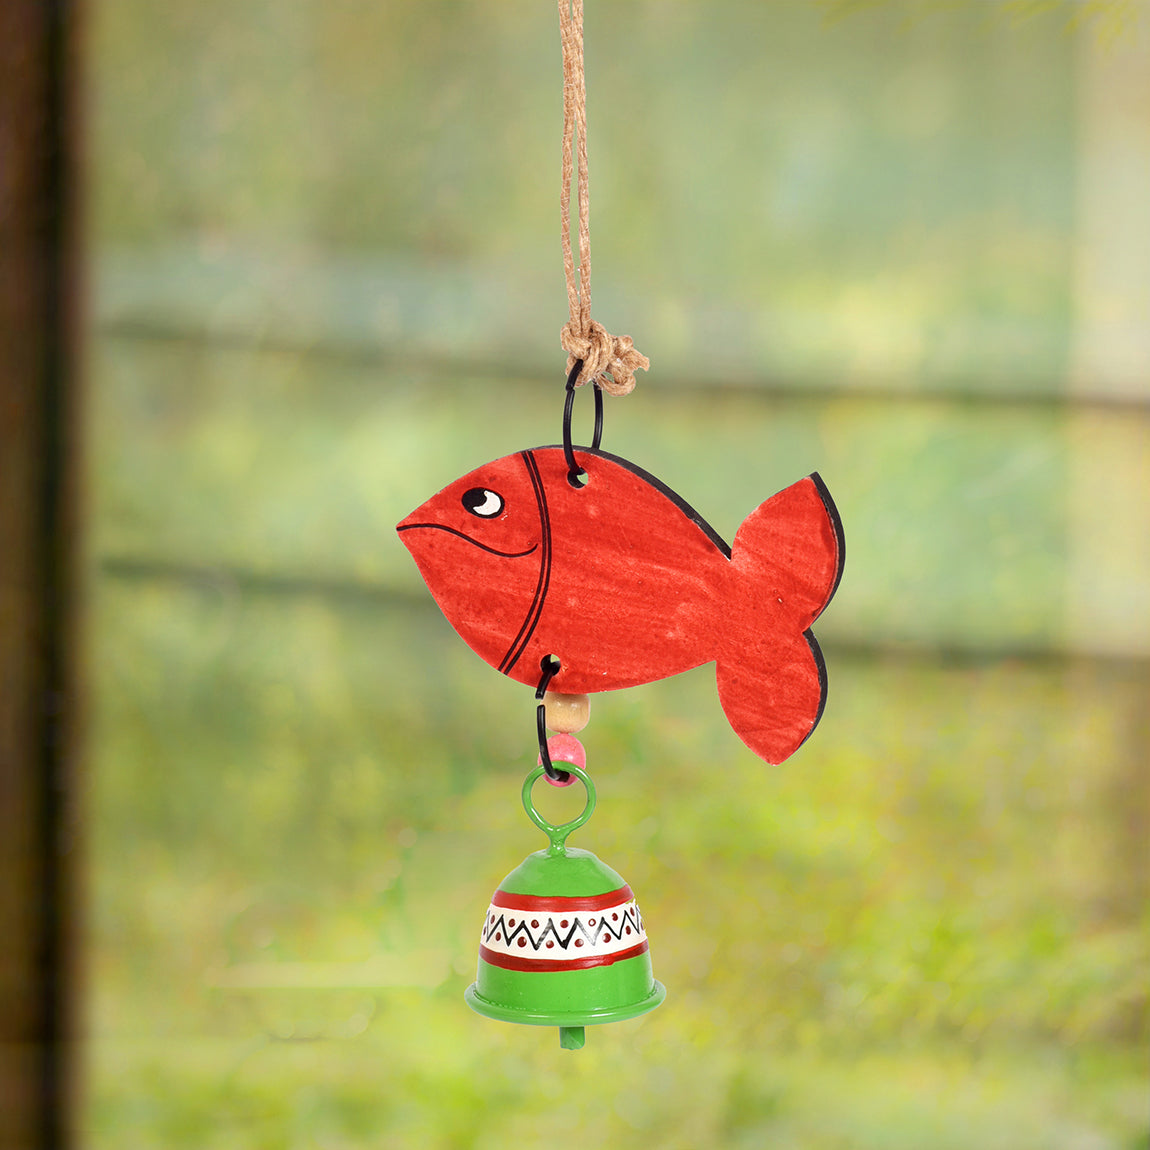 Handpainted Red Fish Wind Chimes for Home Decorative